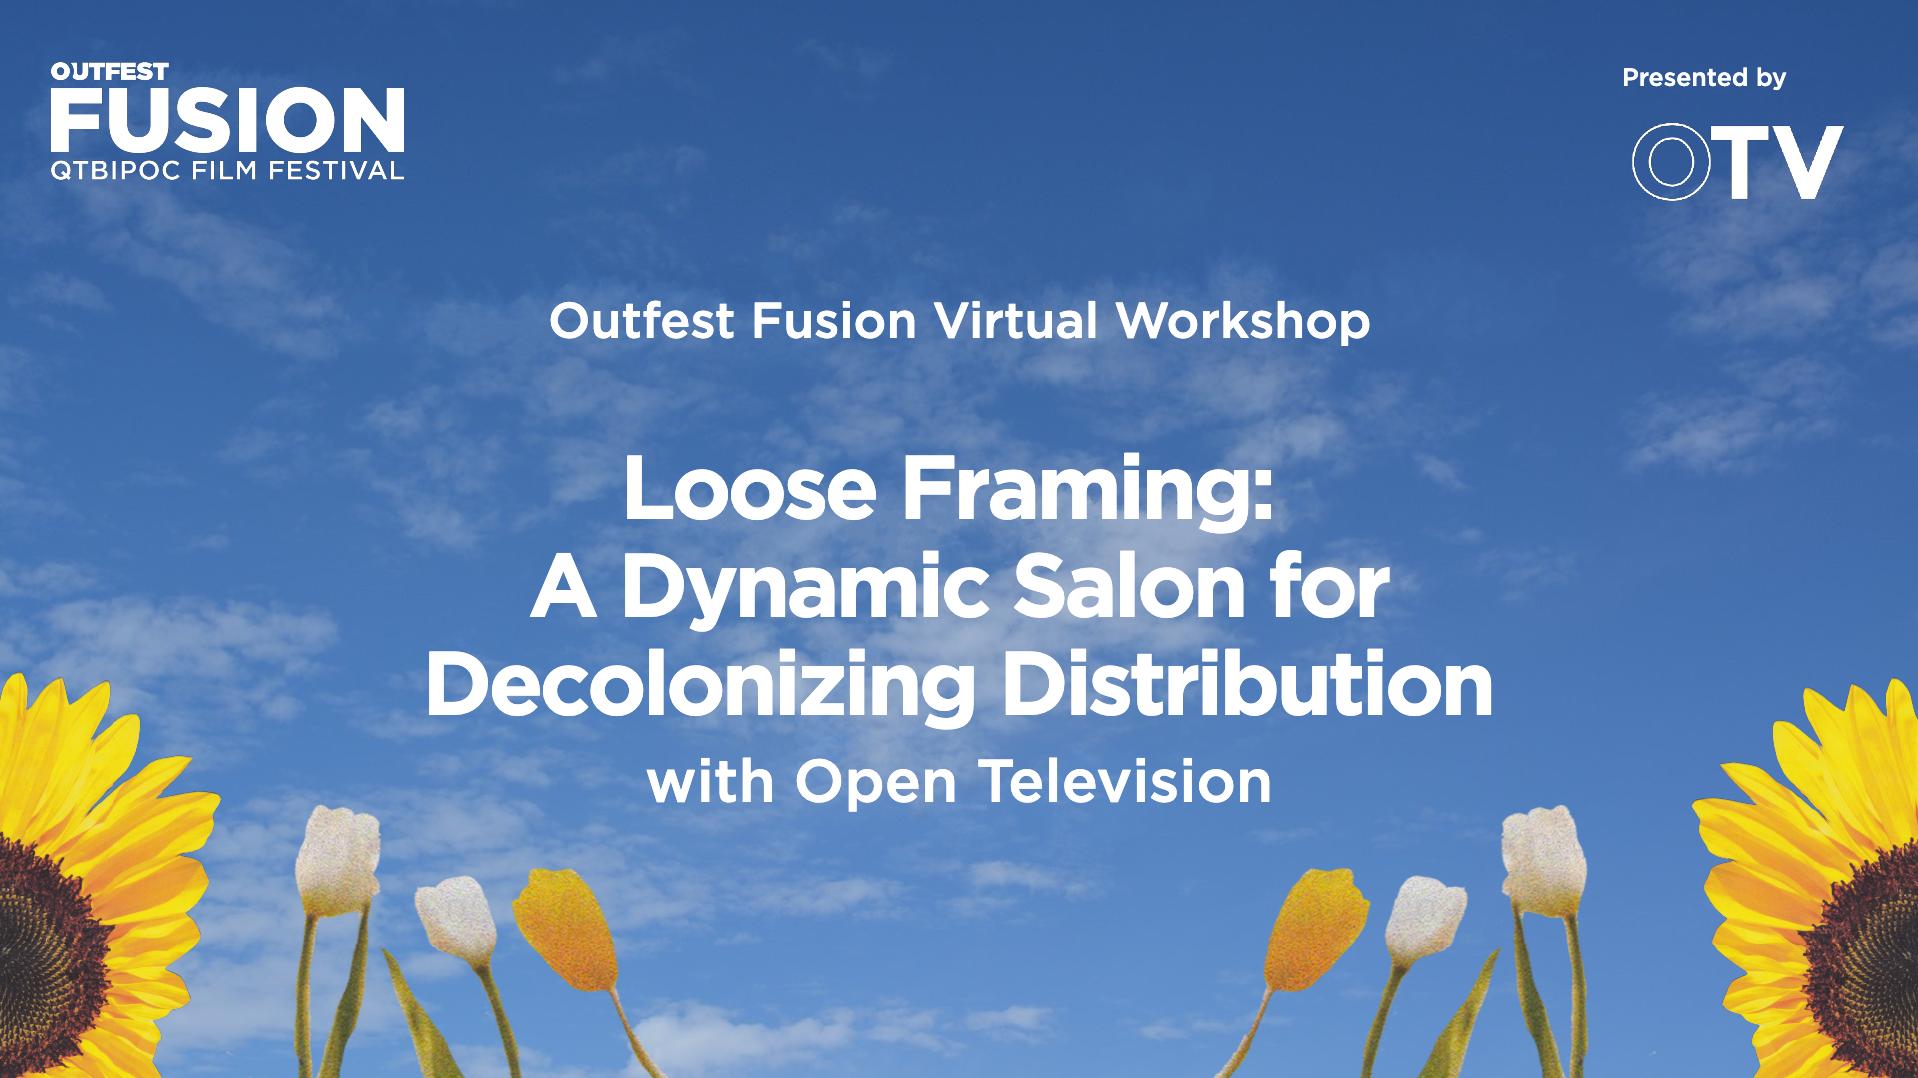 Loose Framing: A Dynamic Salon for Decolonizing Distribution